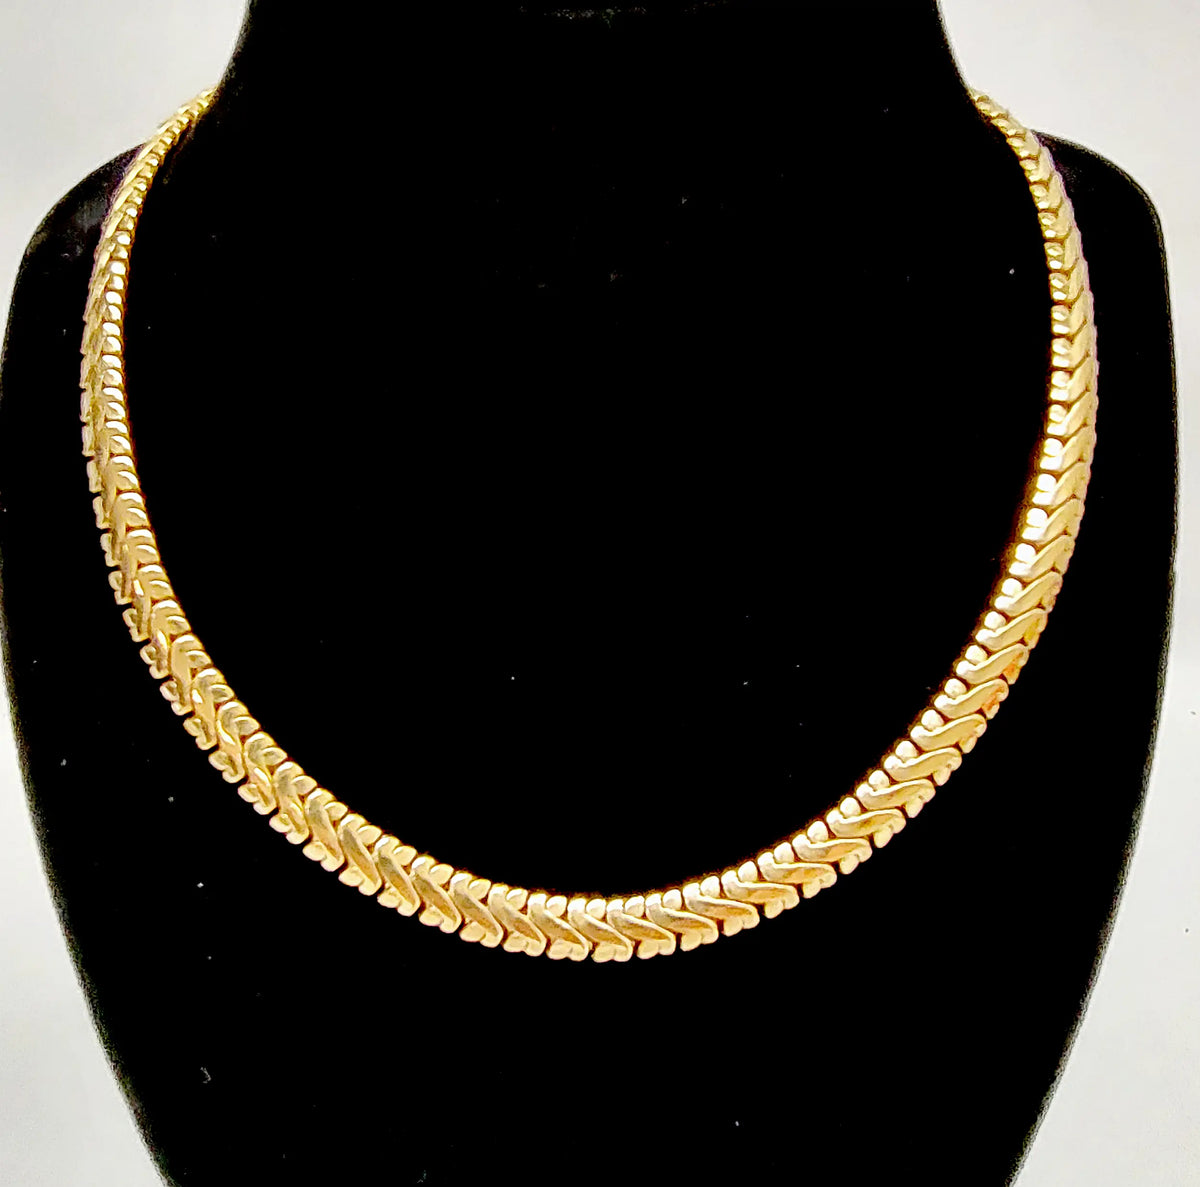 Vintage Monet Gold Tone Chunky Necklace - Hers and His Treasures